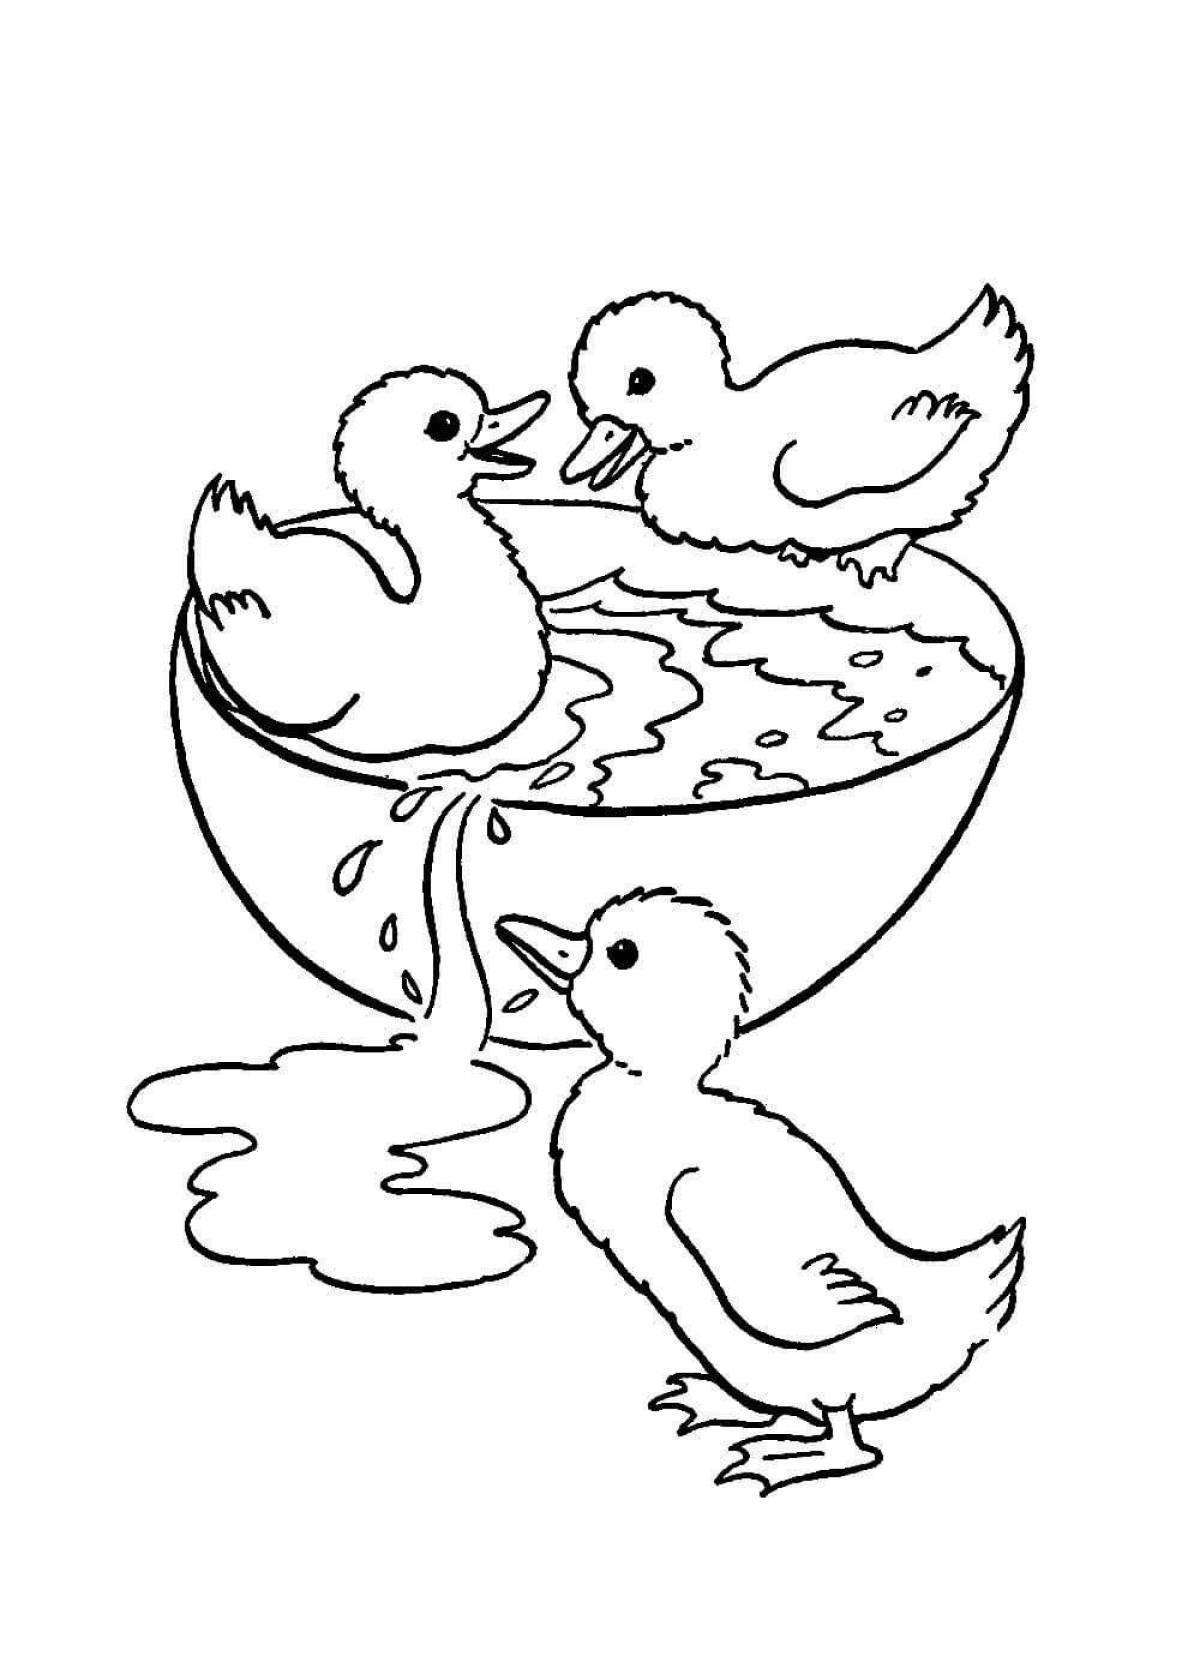 Lalafanfan bold duck coloring page